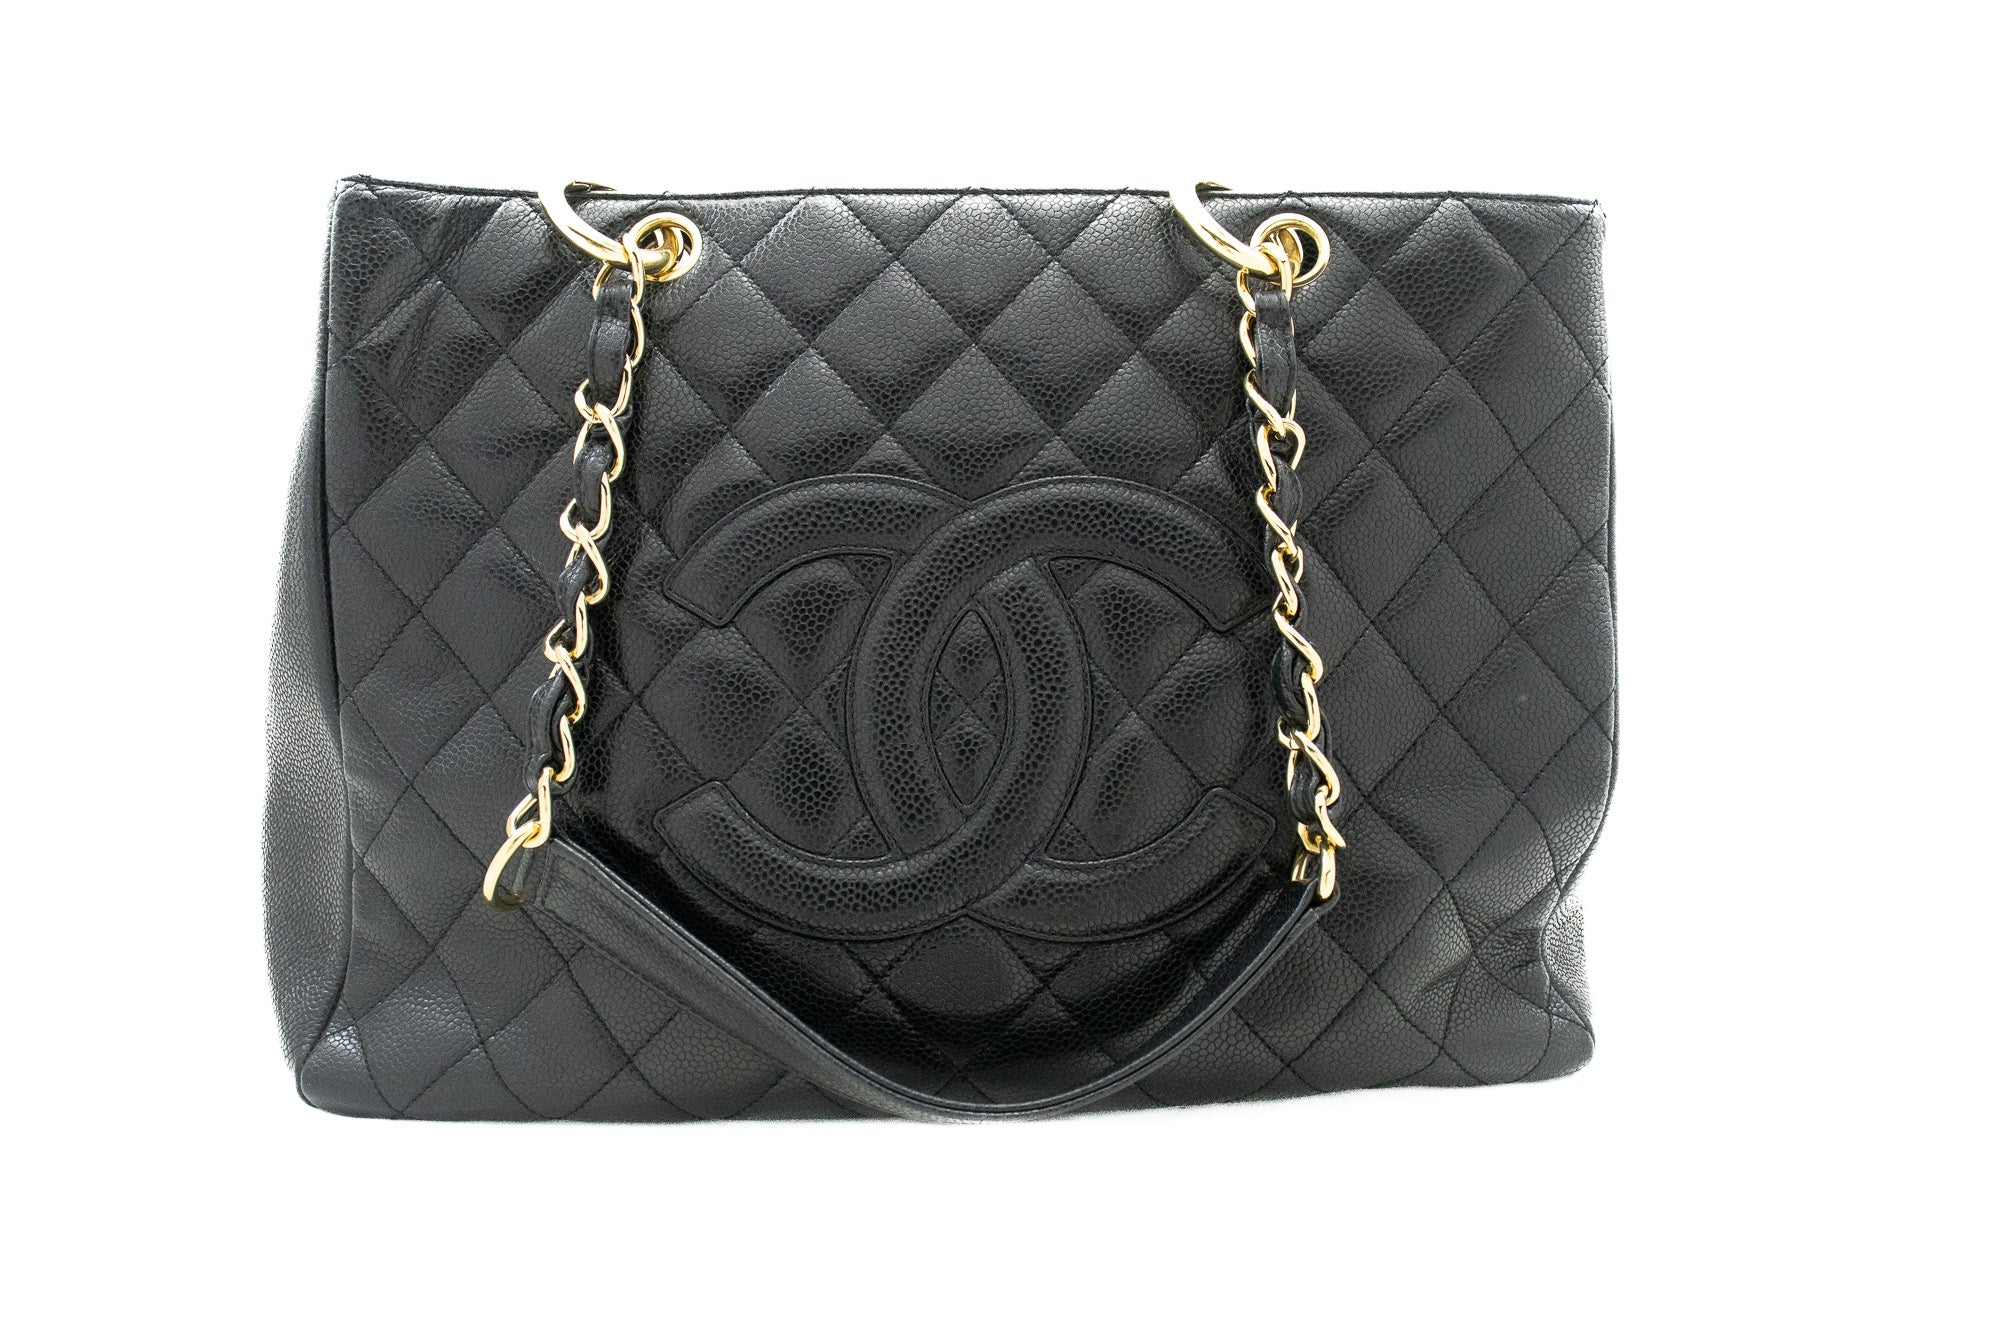 Chanel 2.55 Quilted Leather Grand Shopping Tote Bag